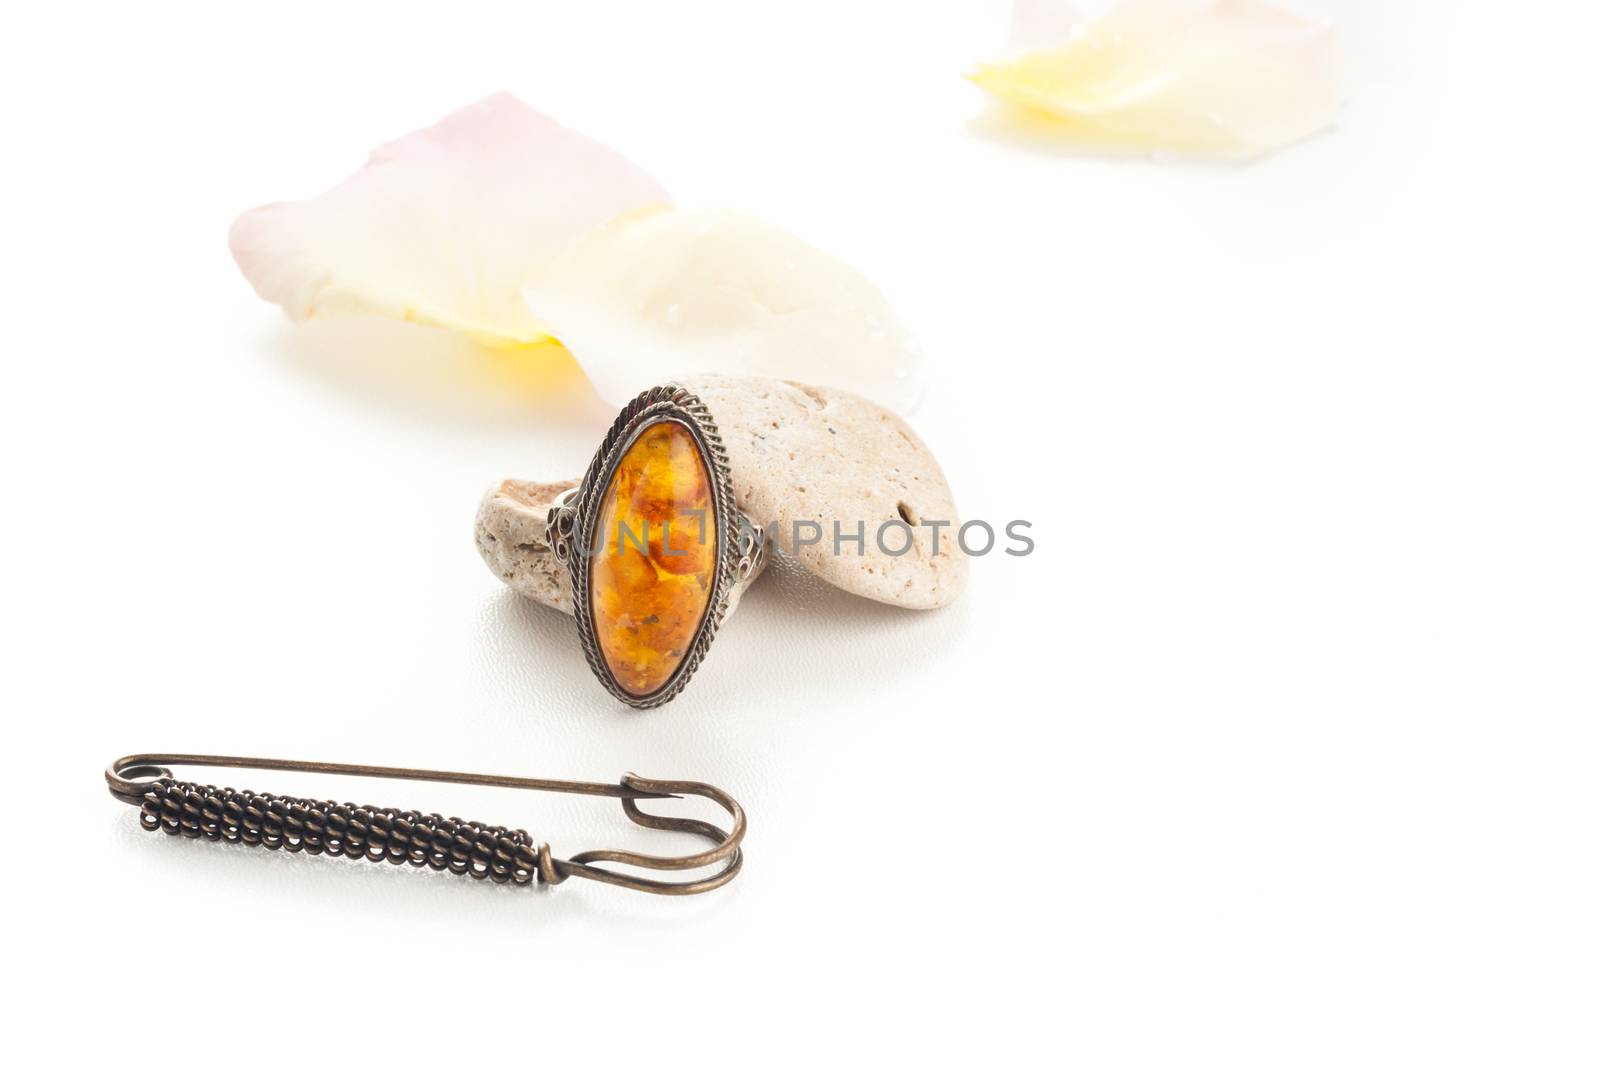 vintage orange ring with stones and rose petals